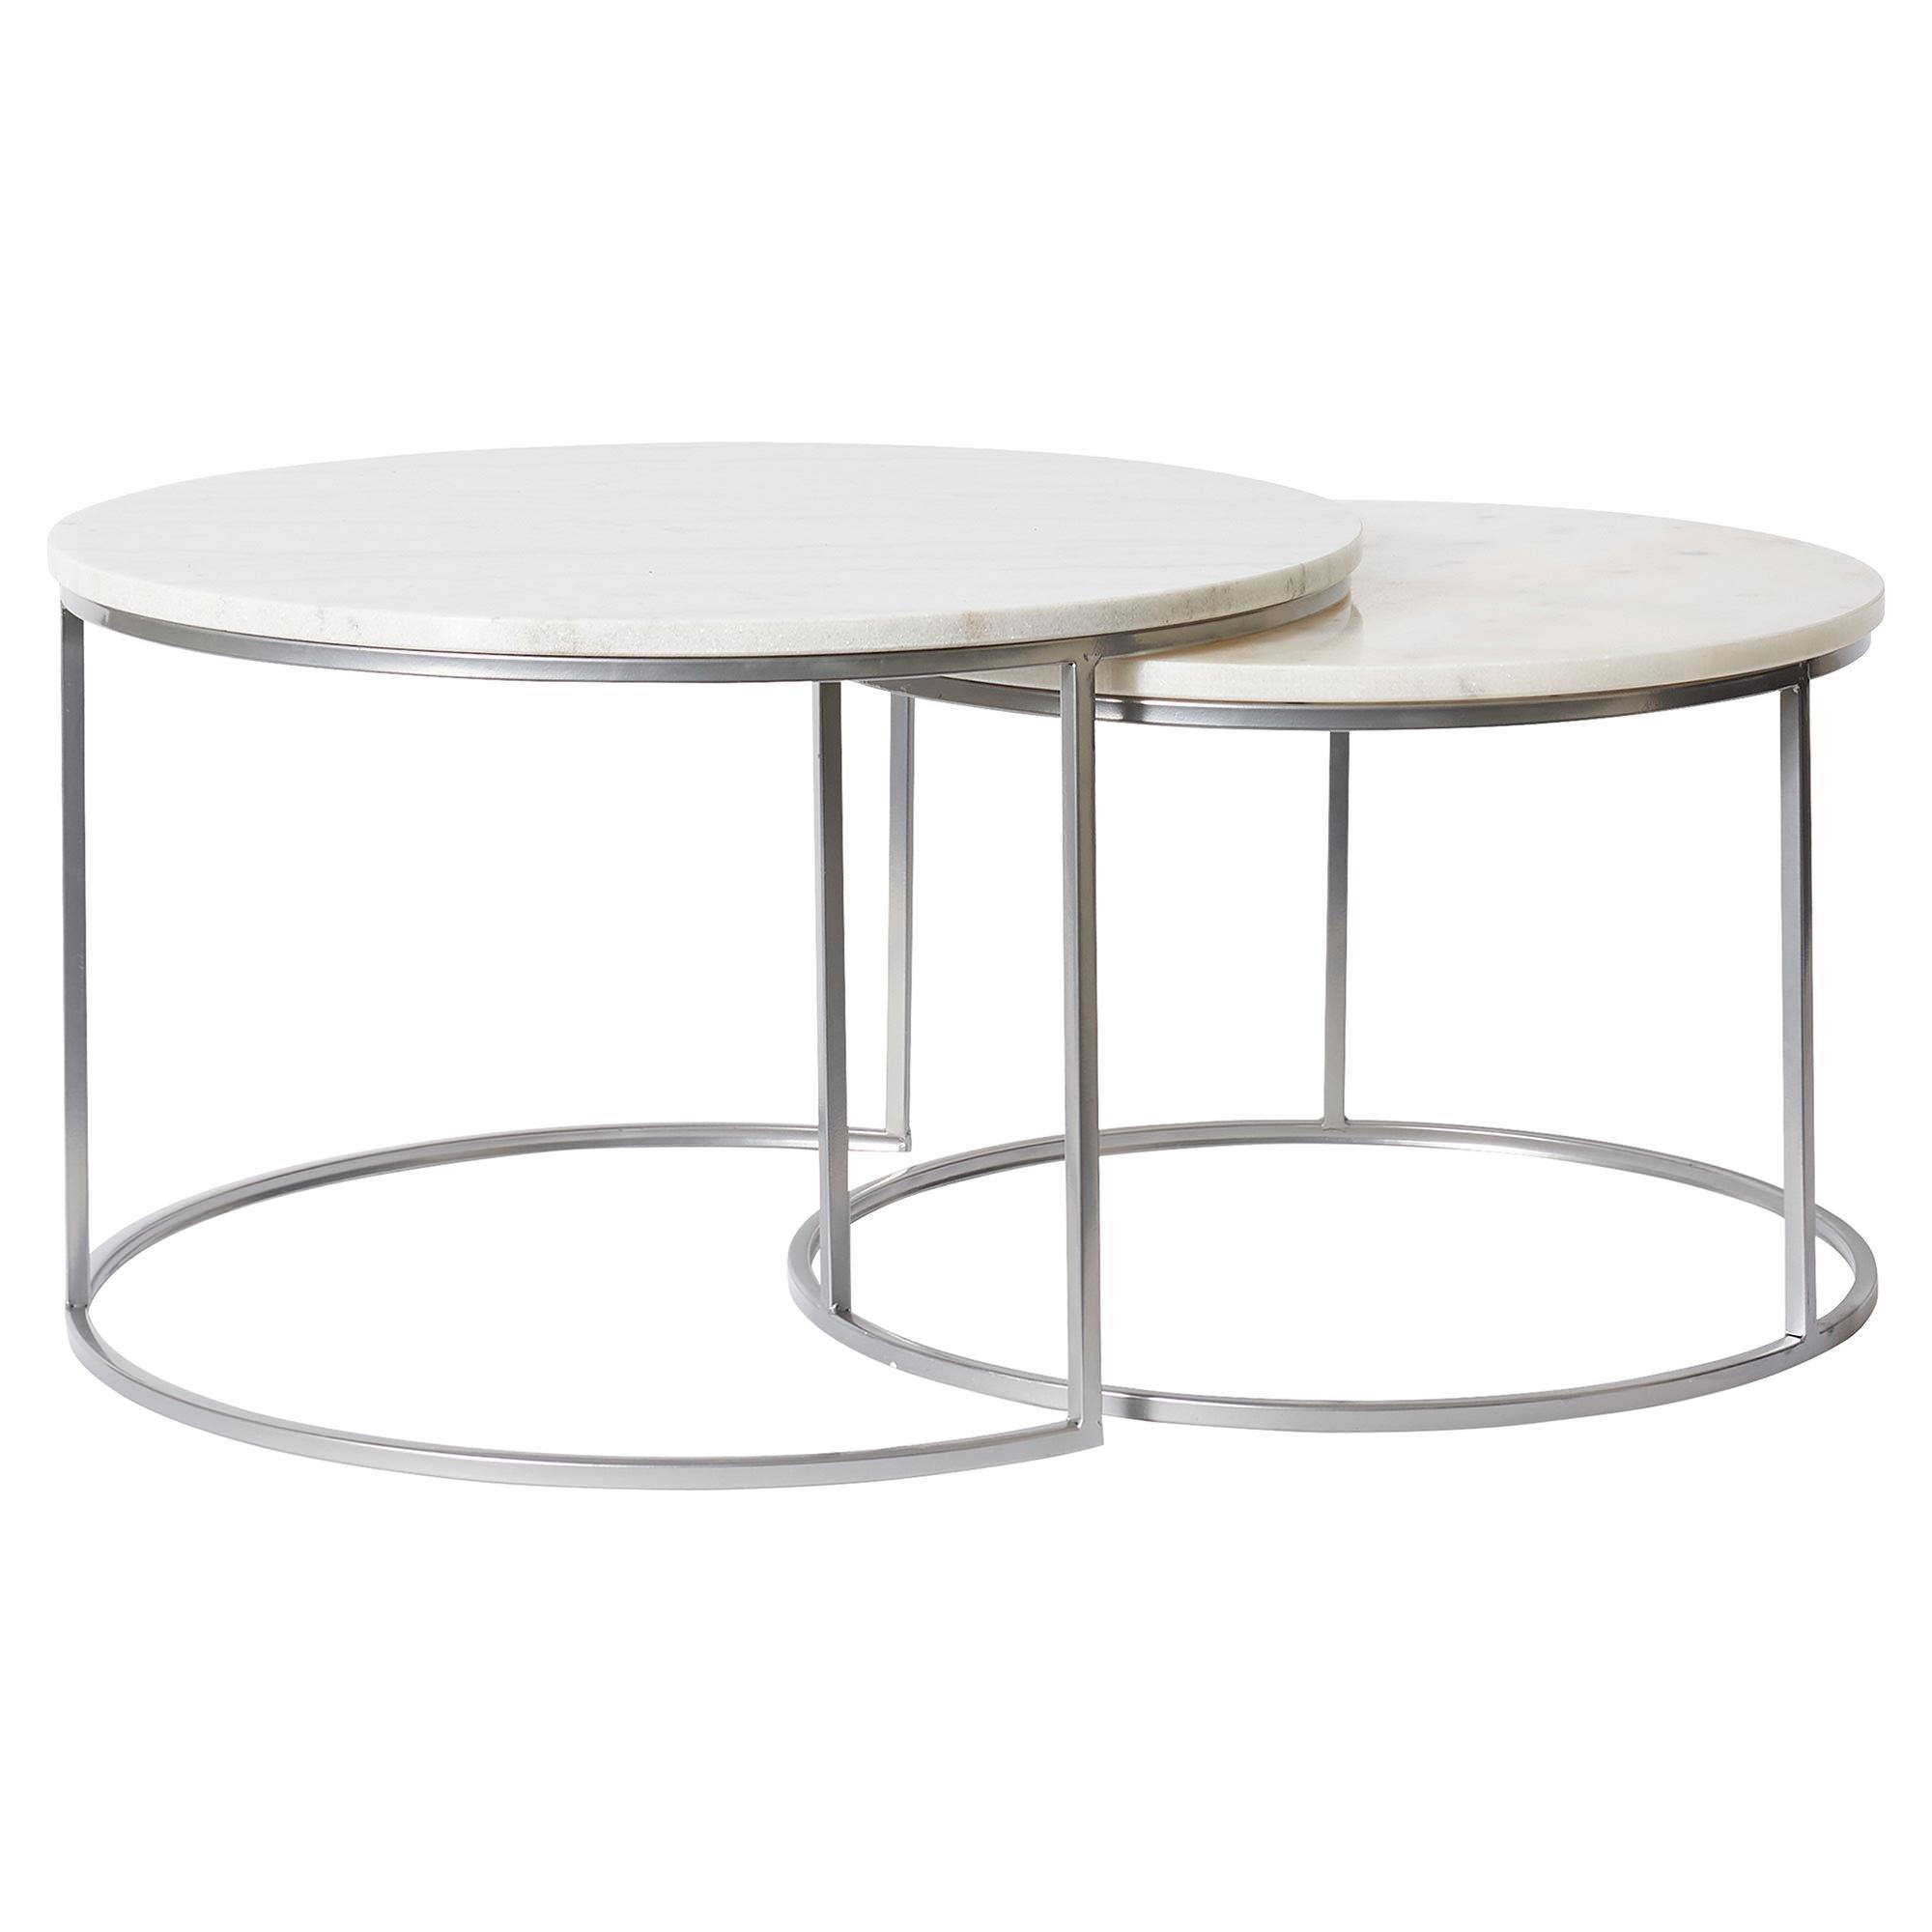 Zander 2 Piece Marble & Metal Round Nested Coffee Table Set, 70/60cm, White / Silver